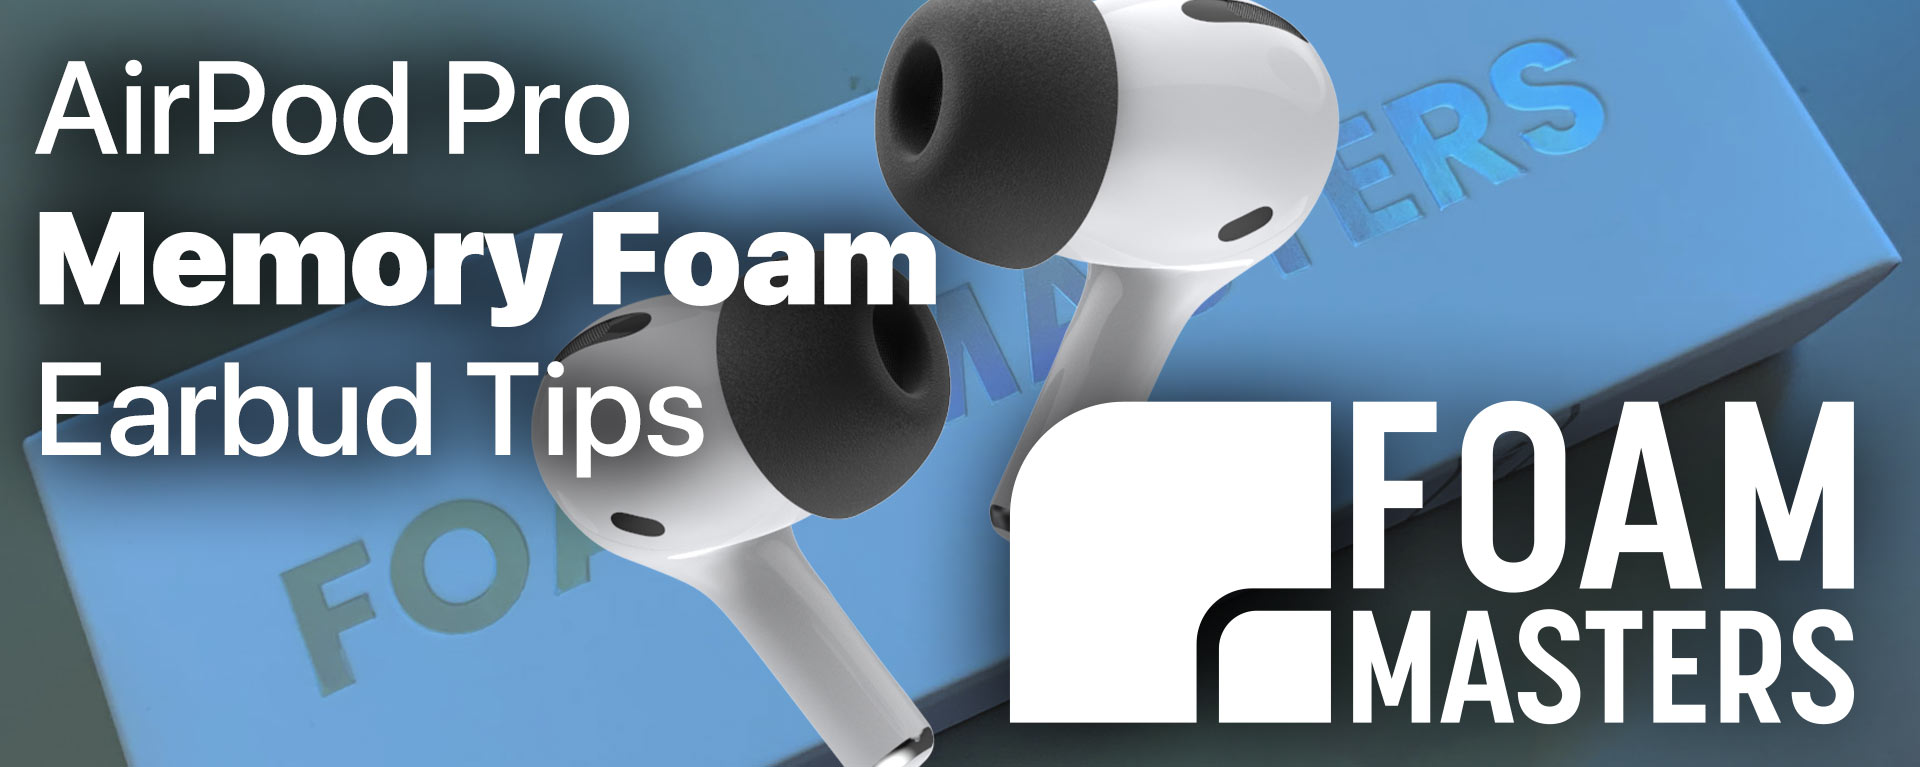 Foam Masters AirPod Pro Tips Feature Image